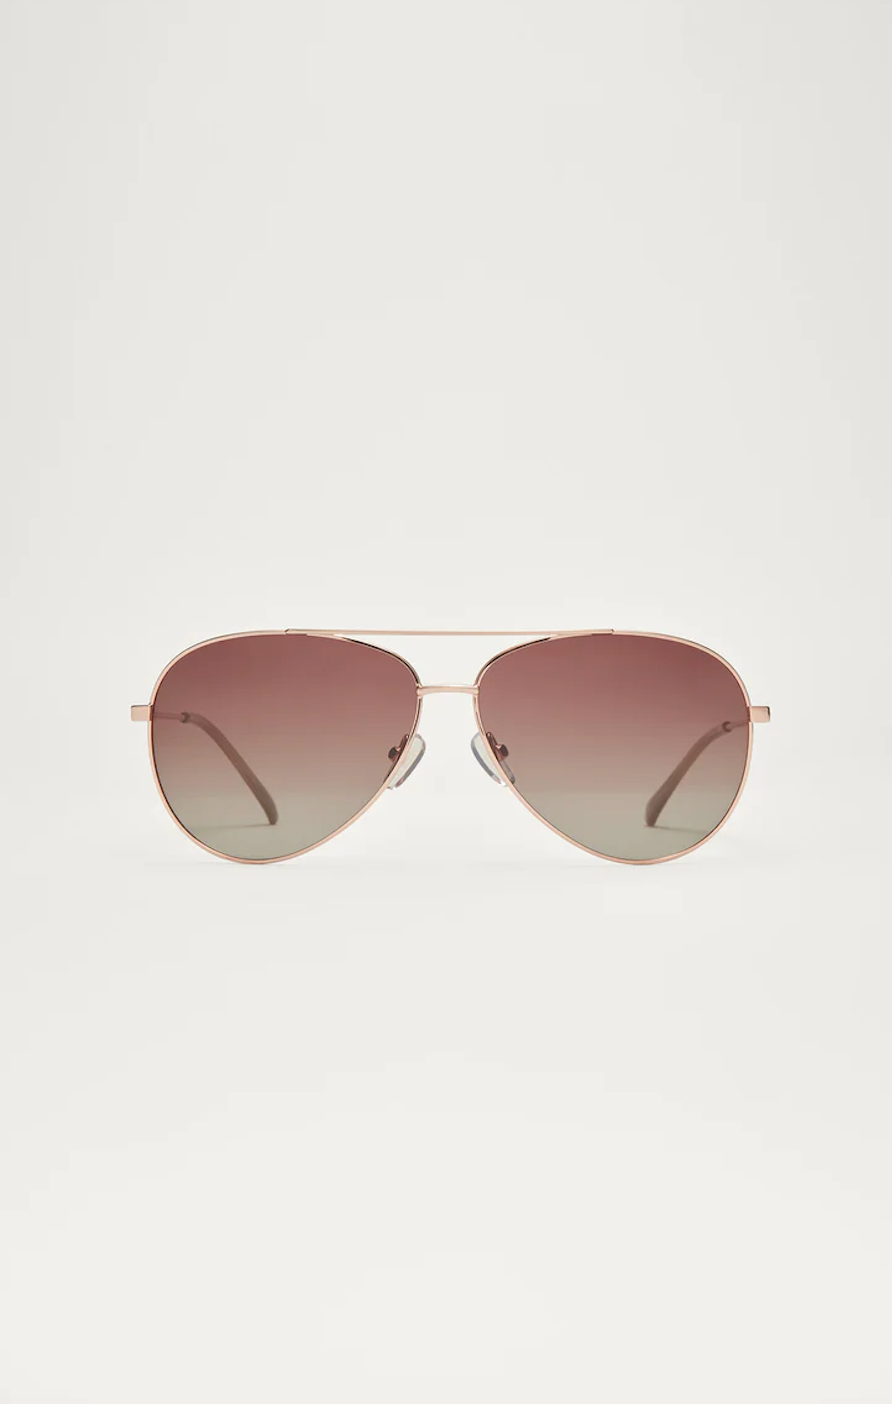 Z SUPPLY DRIVER SUNGLASSES IN ROSE GOLD GRADIENT